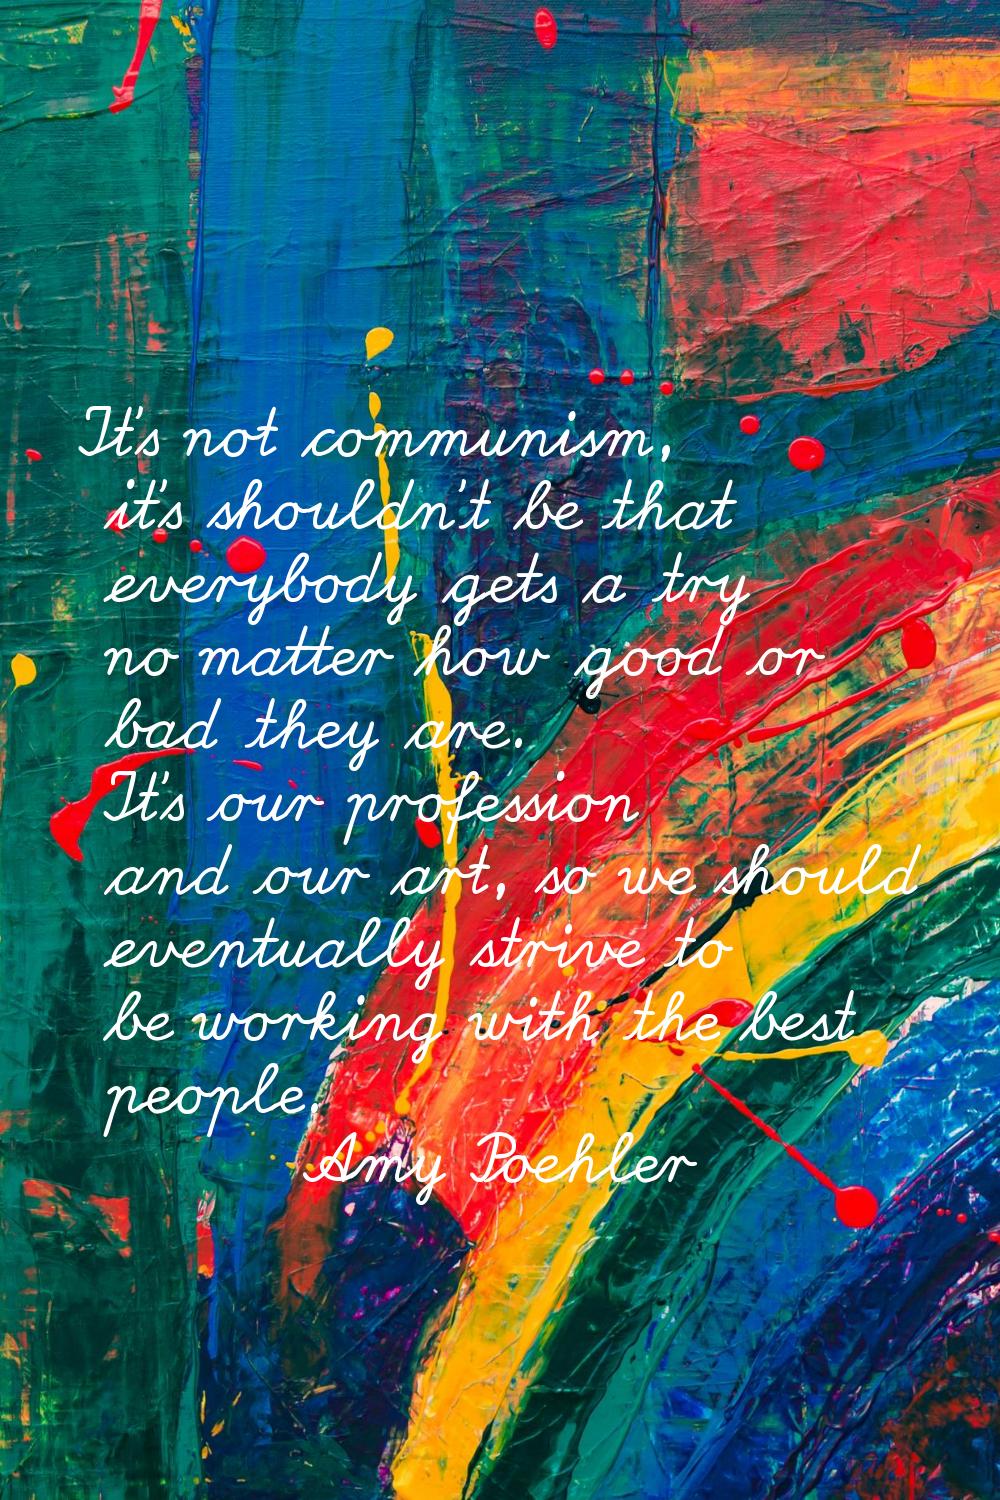 It's not communism, it's shouldn't be that everybody gets a try no matter how good or bad they are.